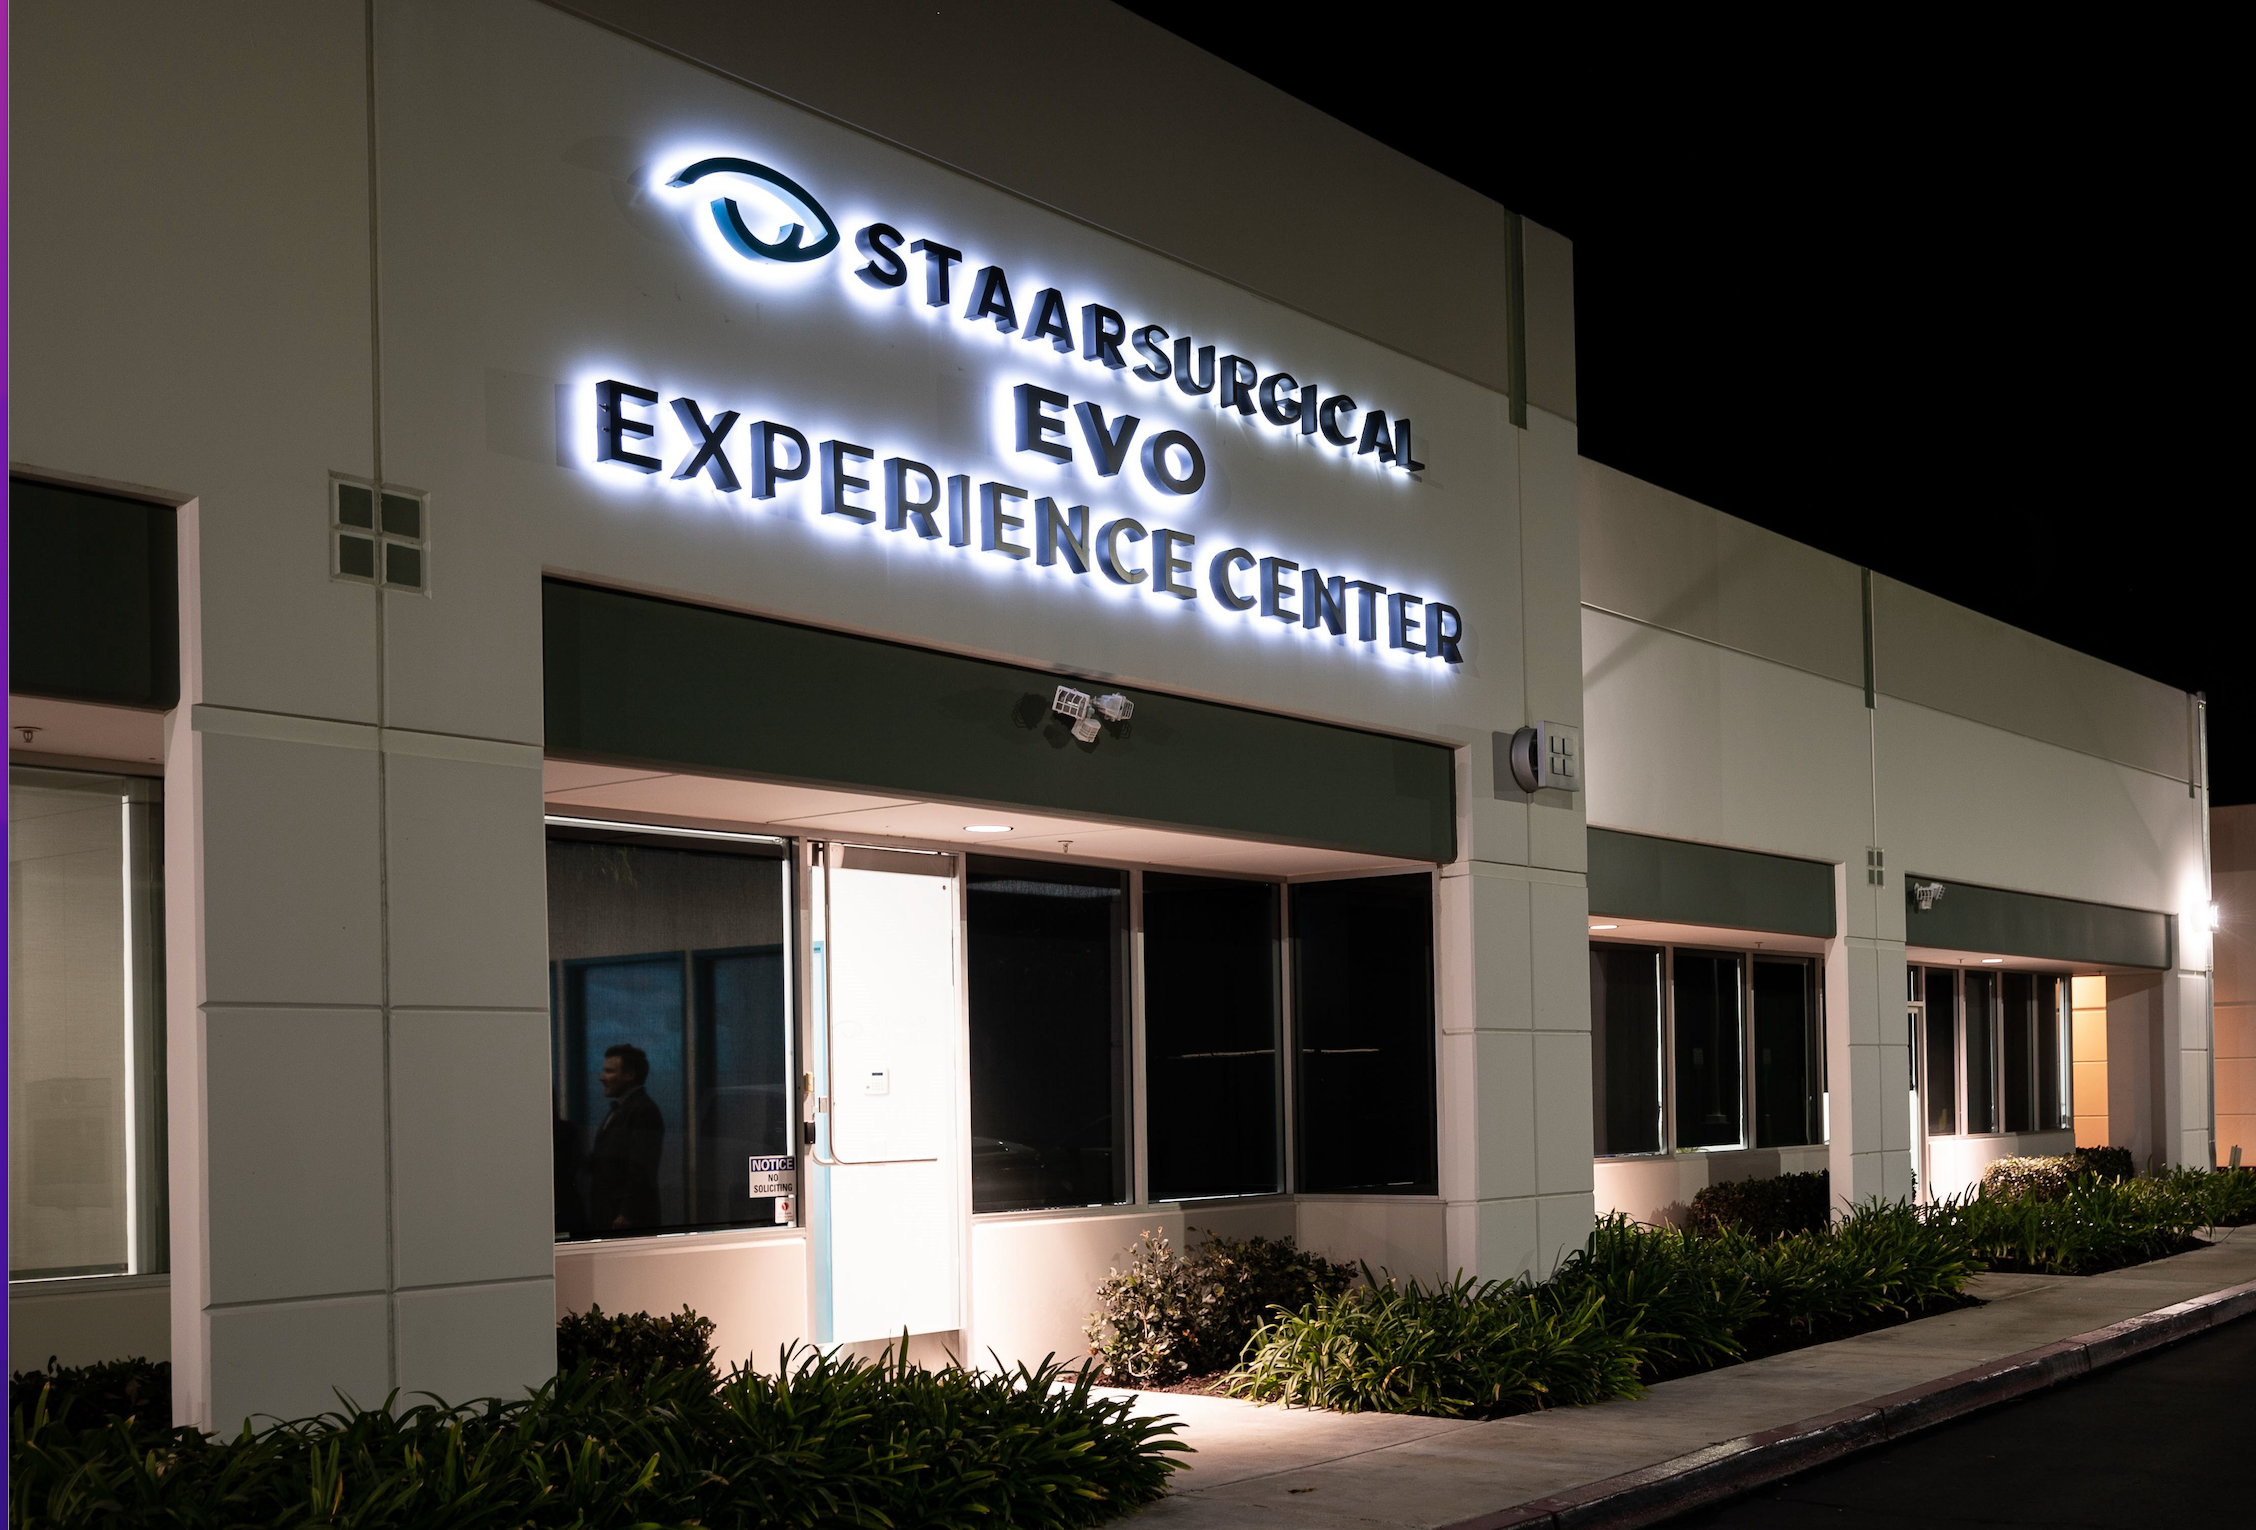 STAAR Surgical's EVO Experience Center will serve as a hub of the EVO Lens-Based Experience for ophthalmic surgeons, staff and healthcare practitioners. (Images courtesy of STAAR Surgical Co.)